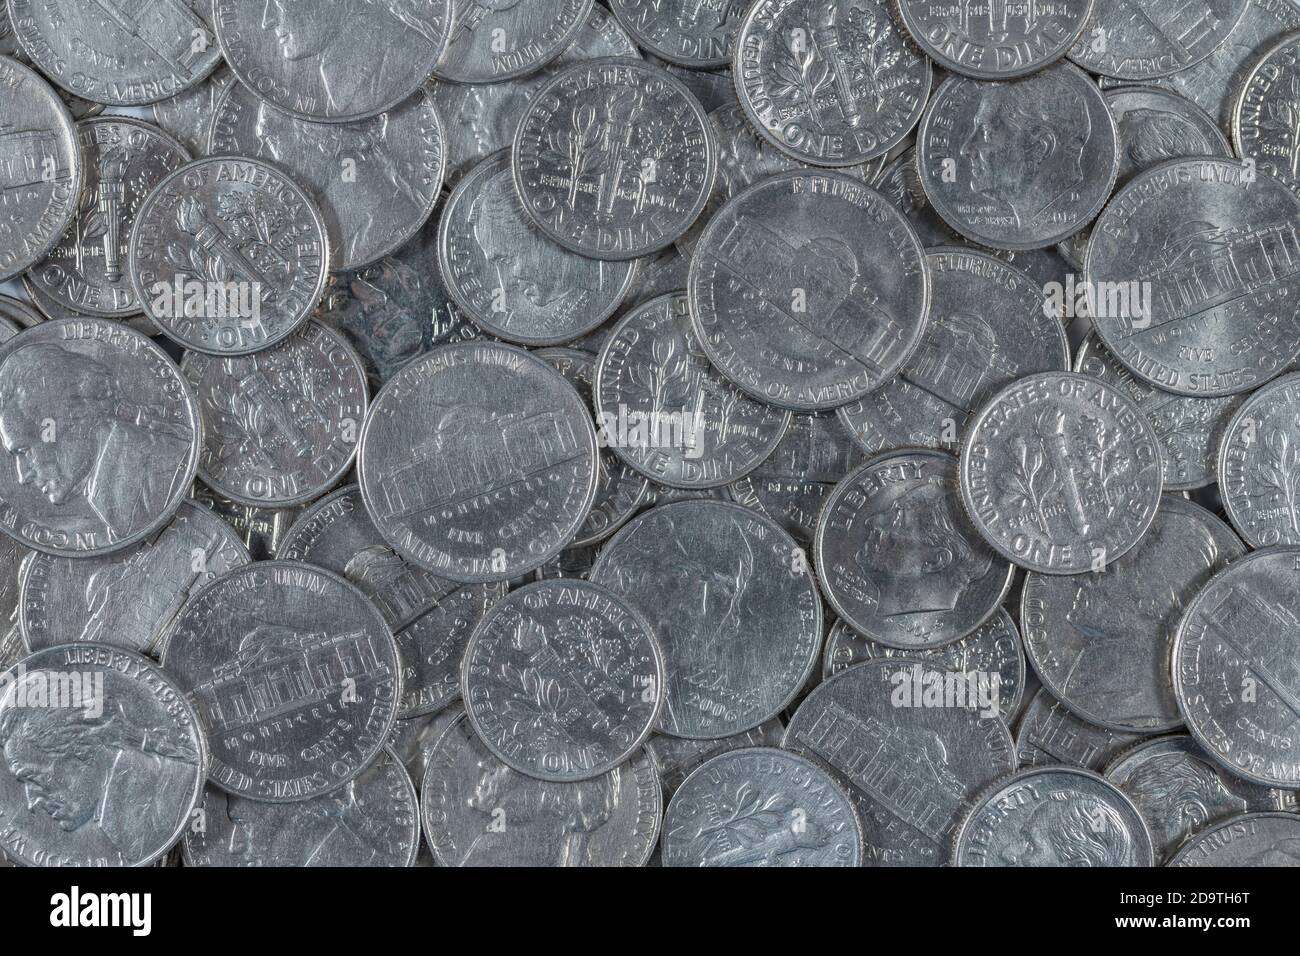 Close shot mass of U.S. nickels and dimes coins. For cheap, low-paying job, low-cost, penny-pinch, five and dime store, being frugal, coin shortage. Stock Photo